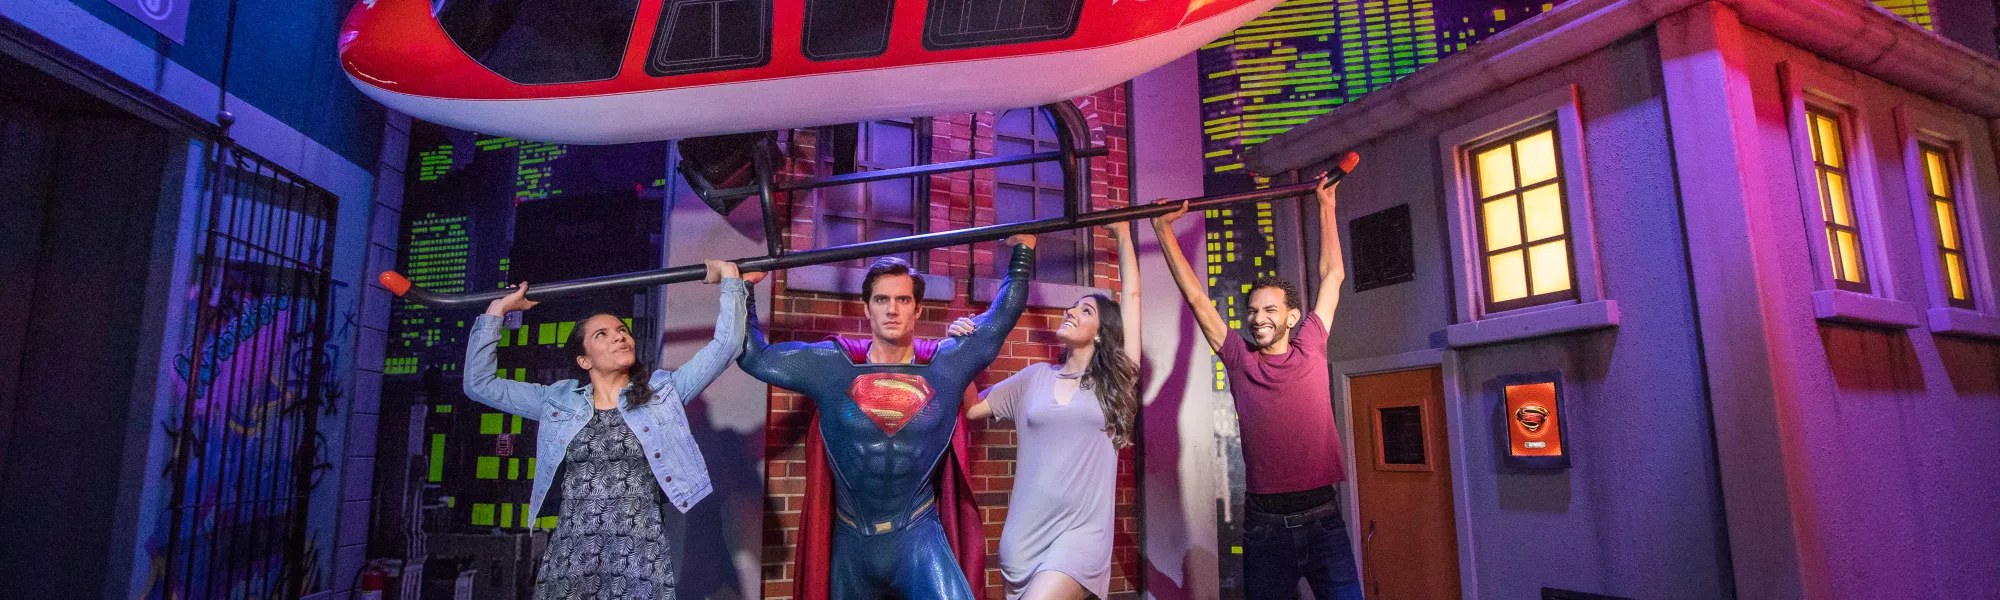 Madame Tussauds in USA, North America | Museums - Rated 3.8